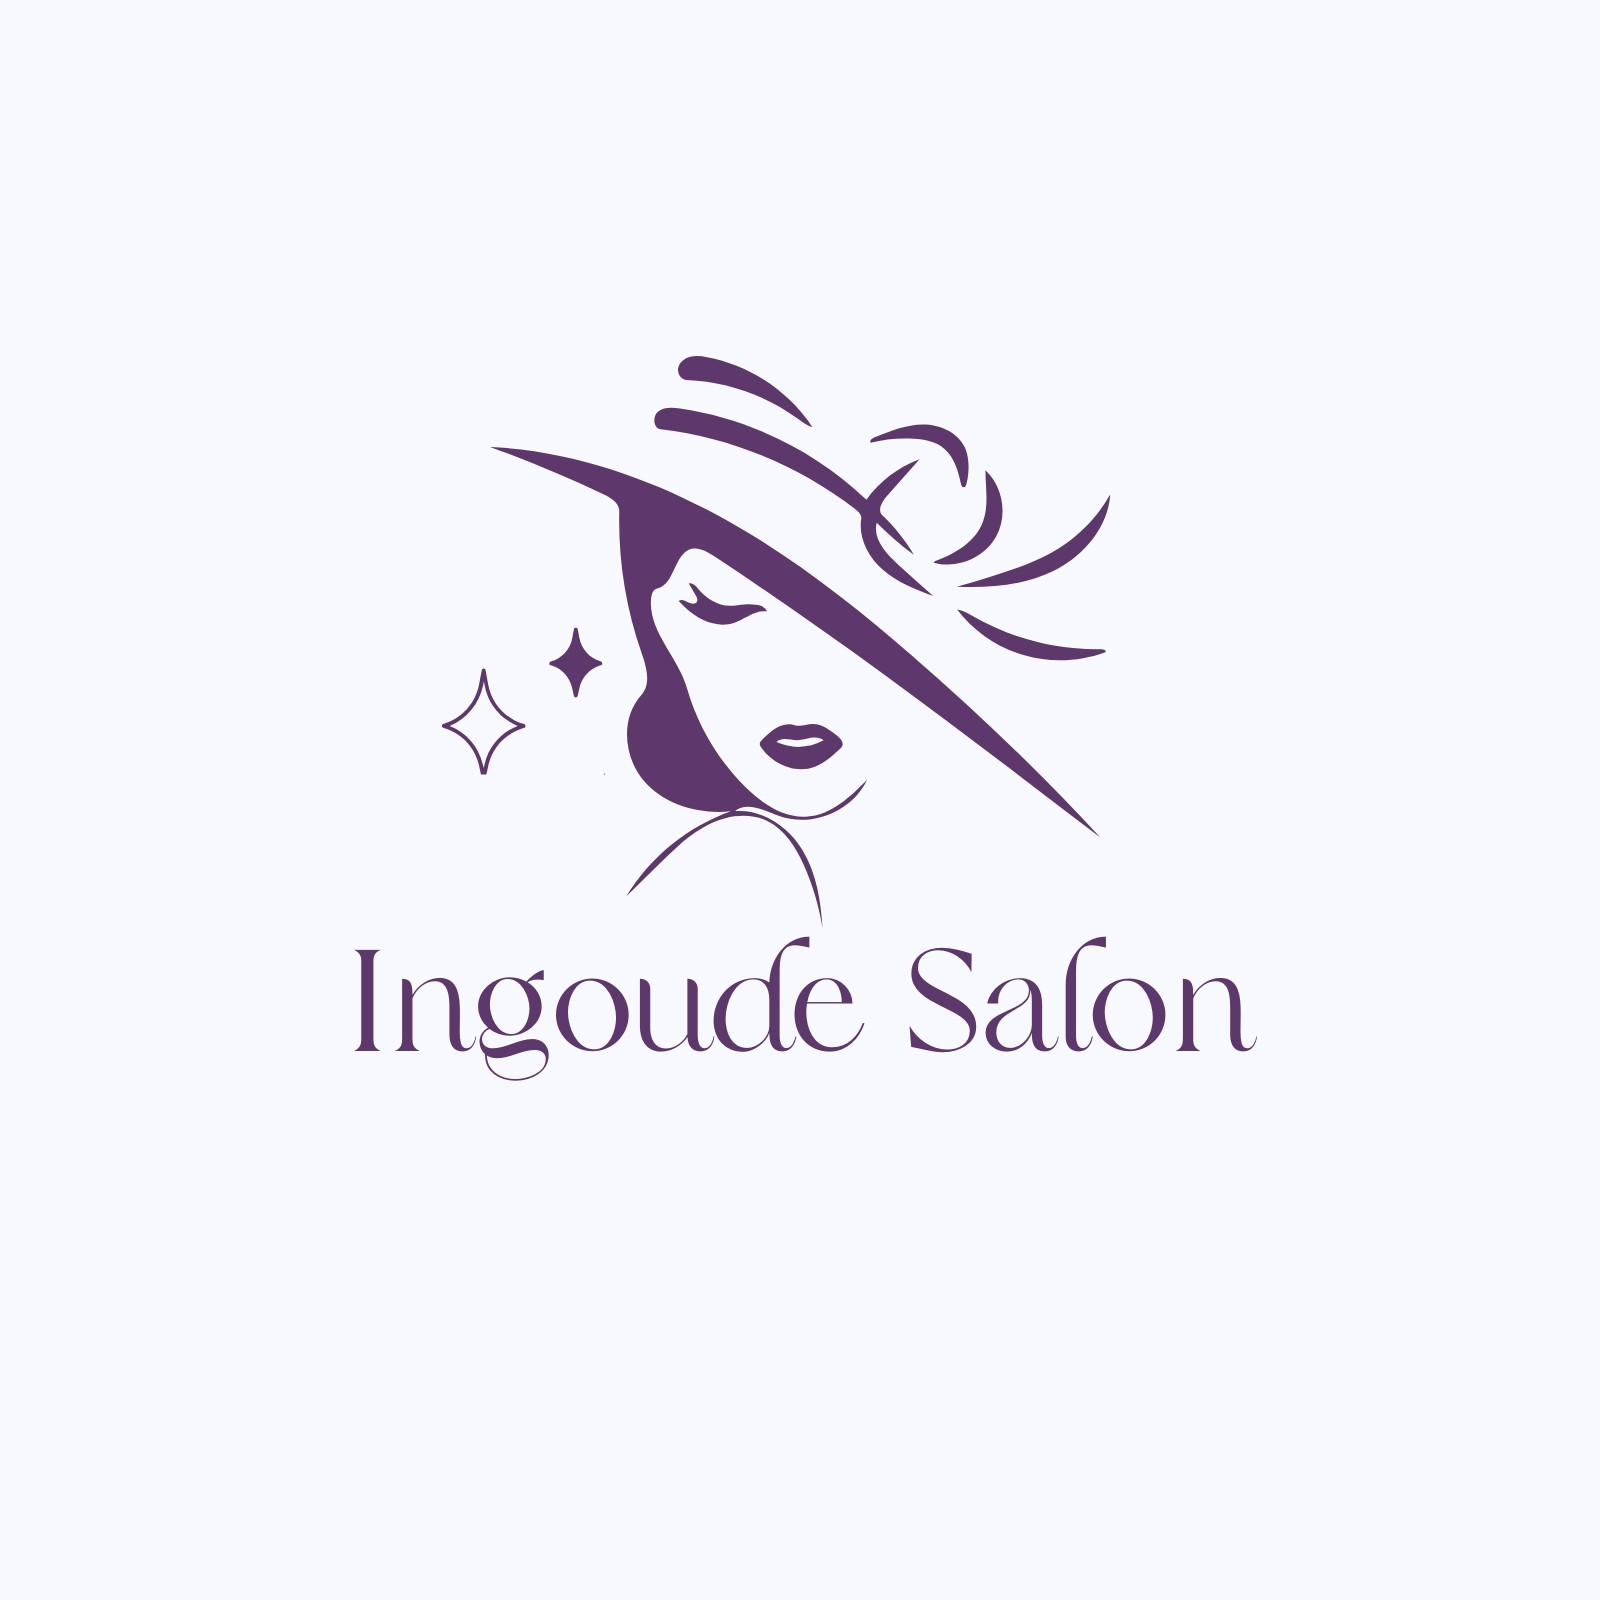 Hair salon logo png images | PNGWing